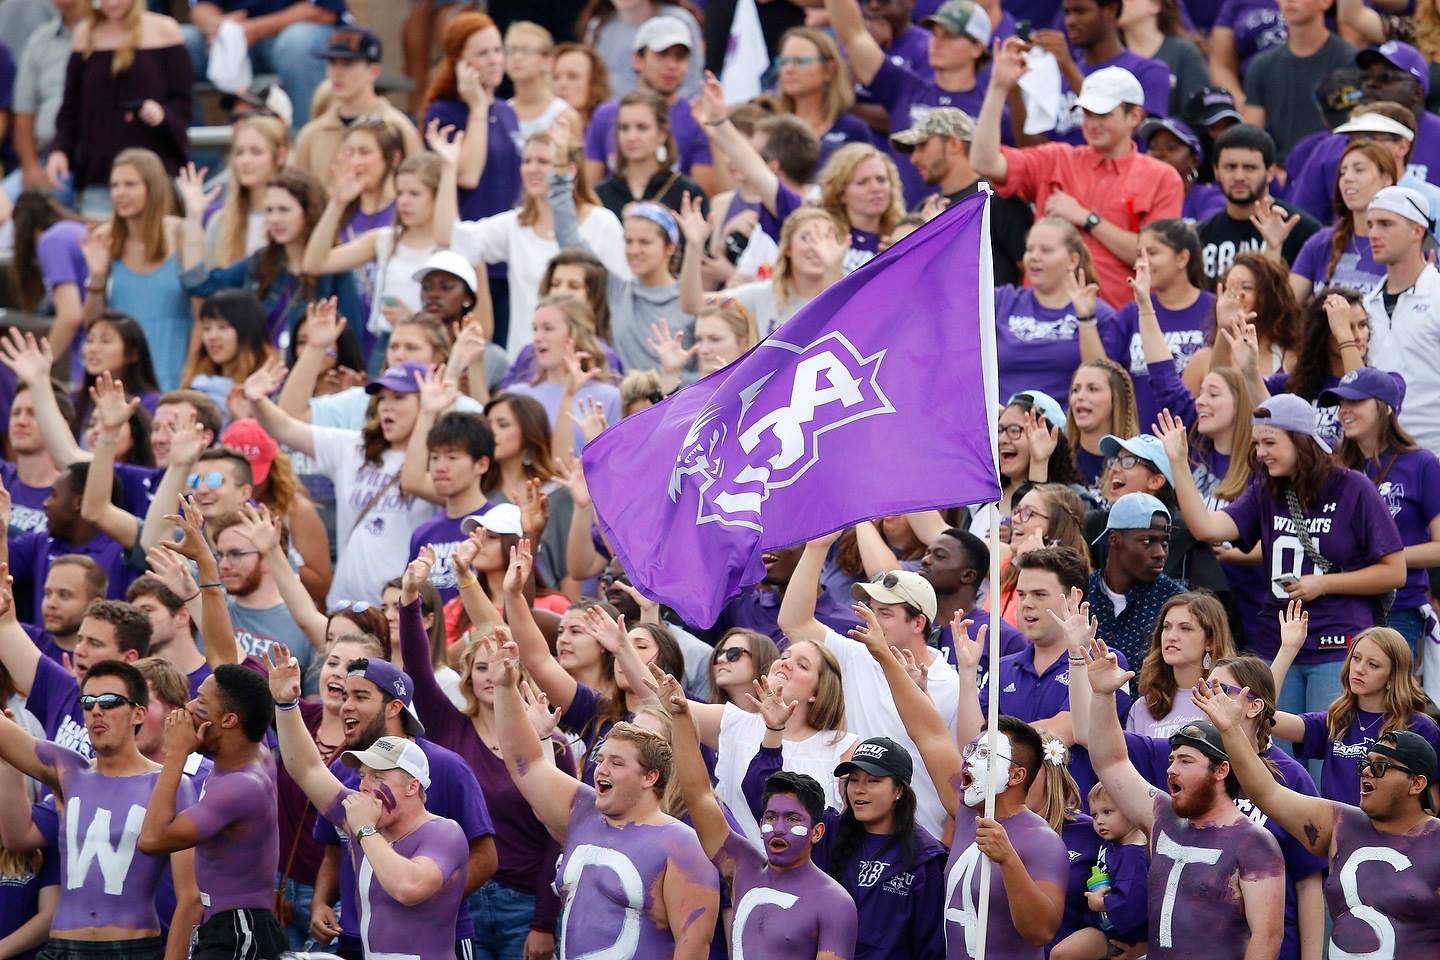 Cheer from Anywhere: ACU Athletics -- Go Wildcats!